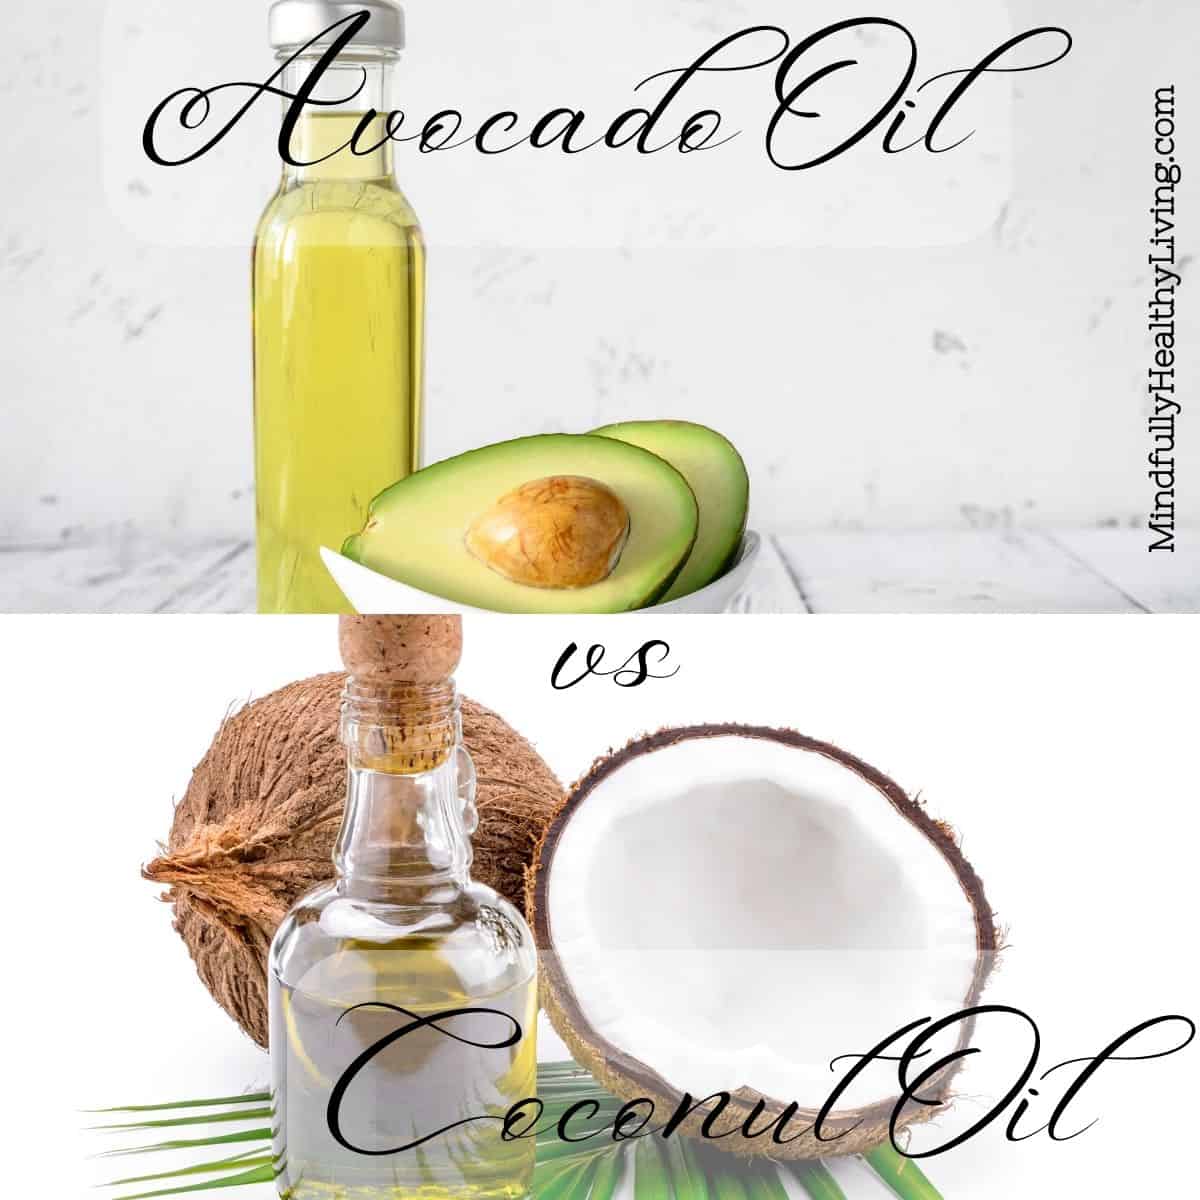 two photos on top of each other in a square. On top is a photo of avocado oil in a bottle next to avocado halves in a white bowl. The bottom is a photo of a clear glass bottle of coconut oil next to one coconut half and one whole coconut on top of a palm frond. The text overlay says Avocado Oil vs Coconut Oil. on the side says mindfullyhealthyliving.com